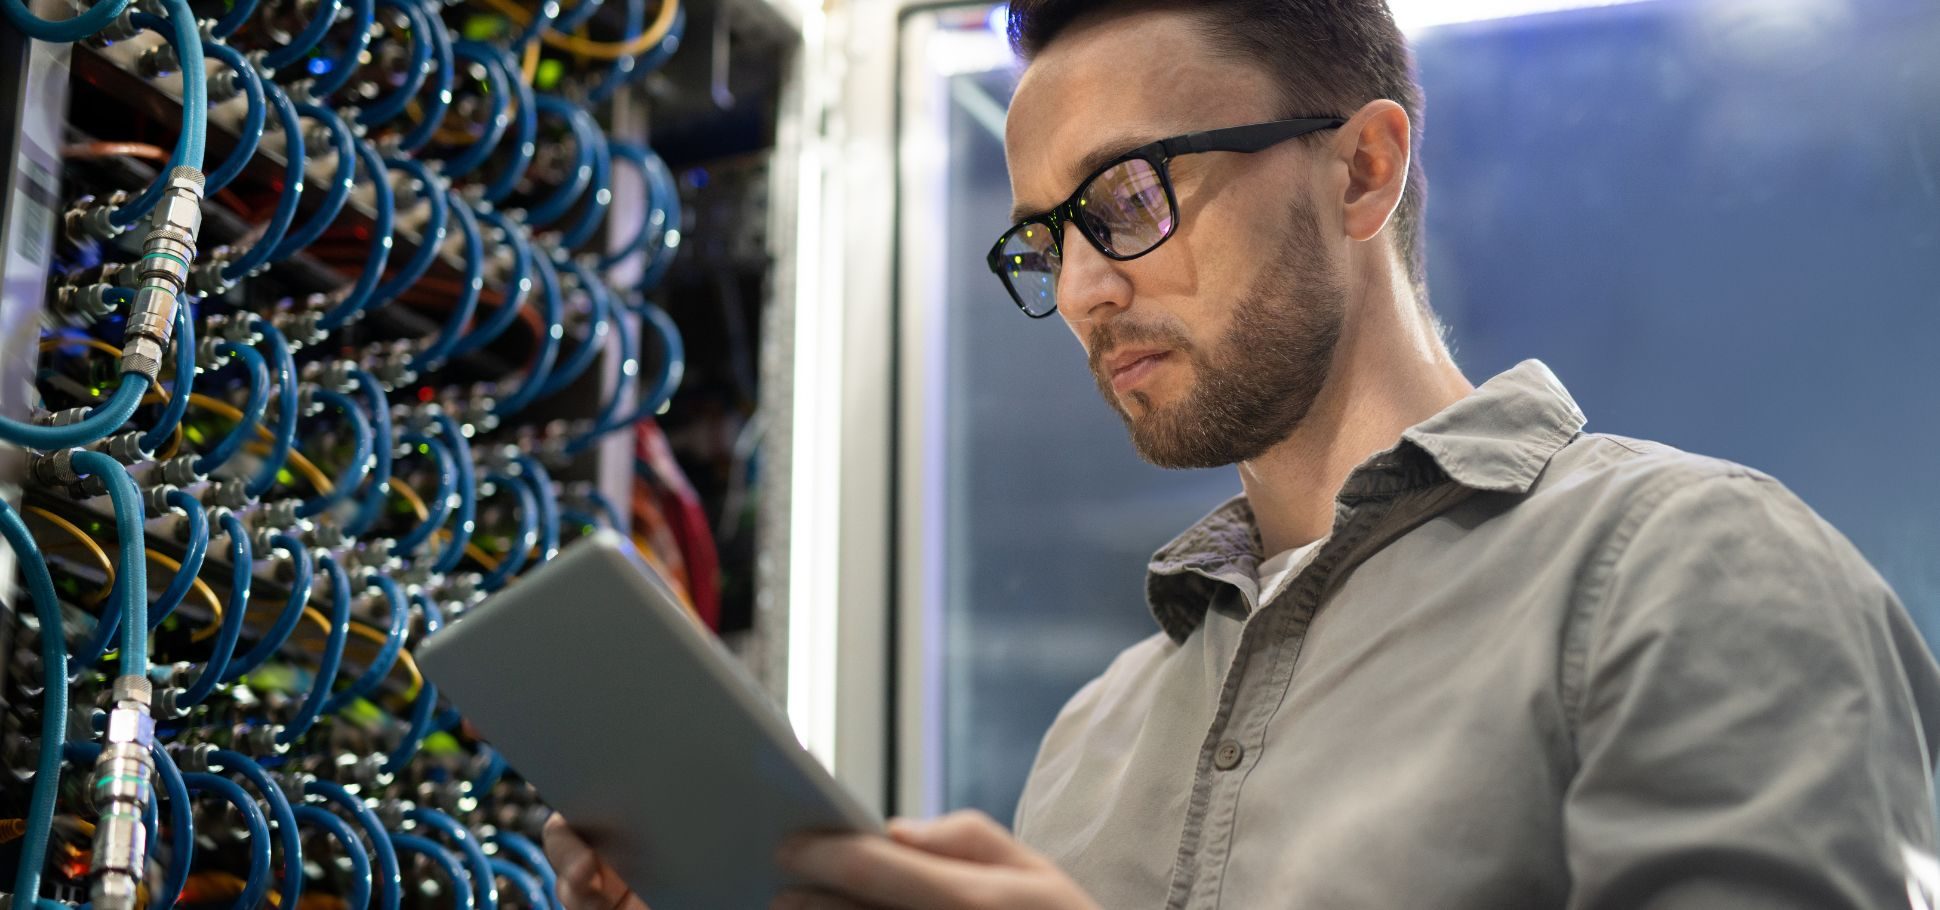 Man wearing glasses works on his tablet in a server room